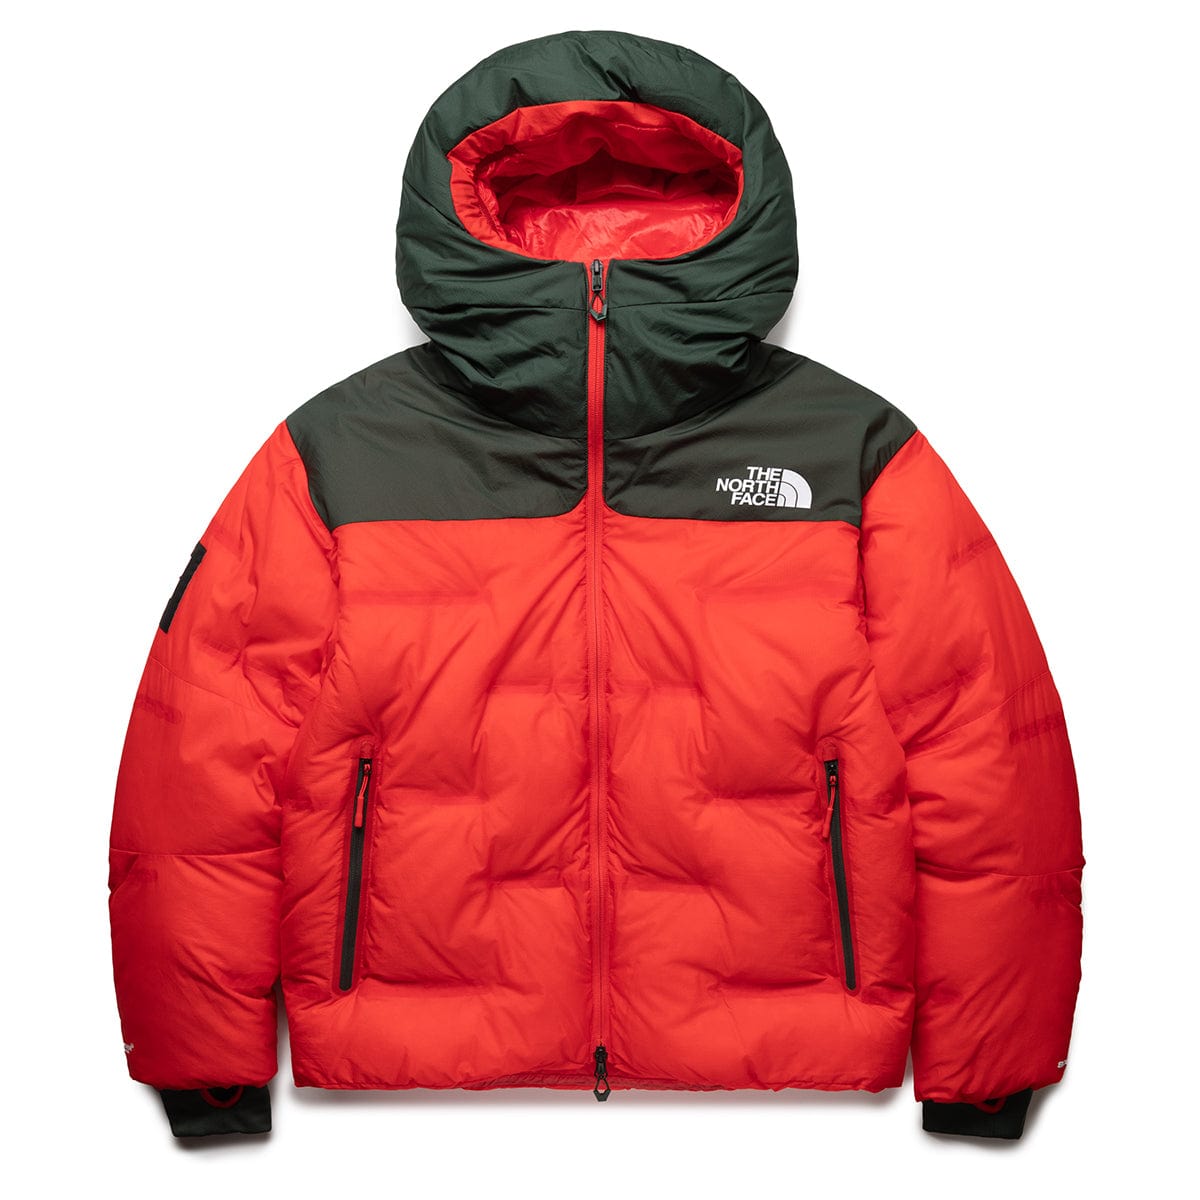 The North Face Summit FutureFleece Full Zip Hoodie - Mens, FREE SHIPPING  in Canada